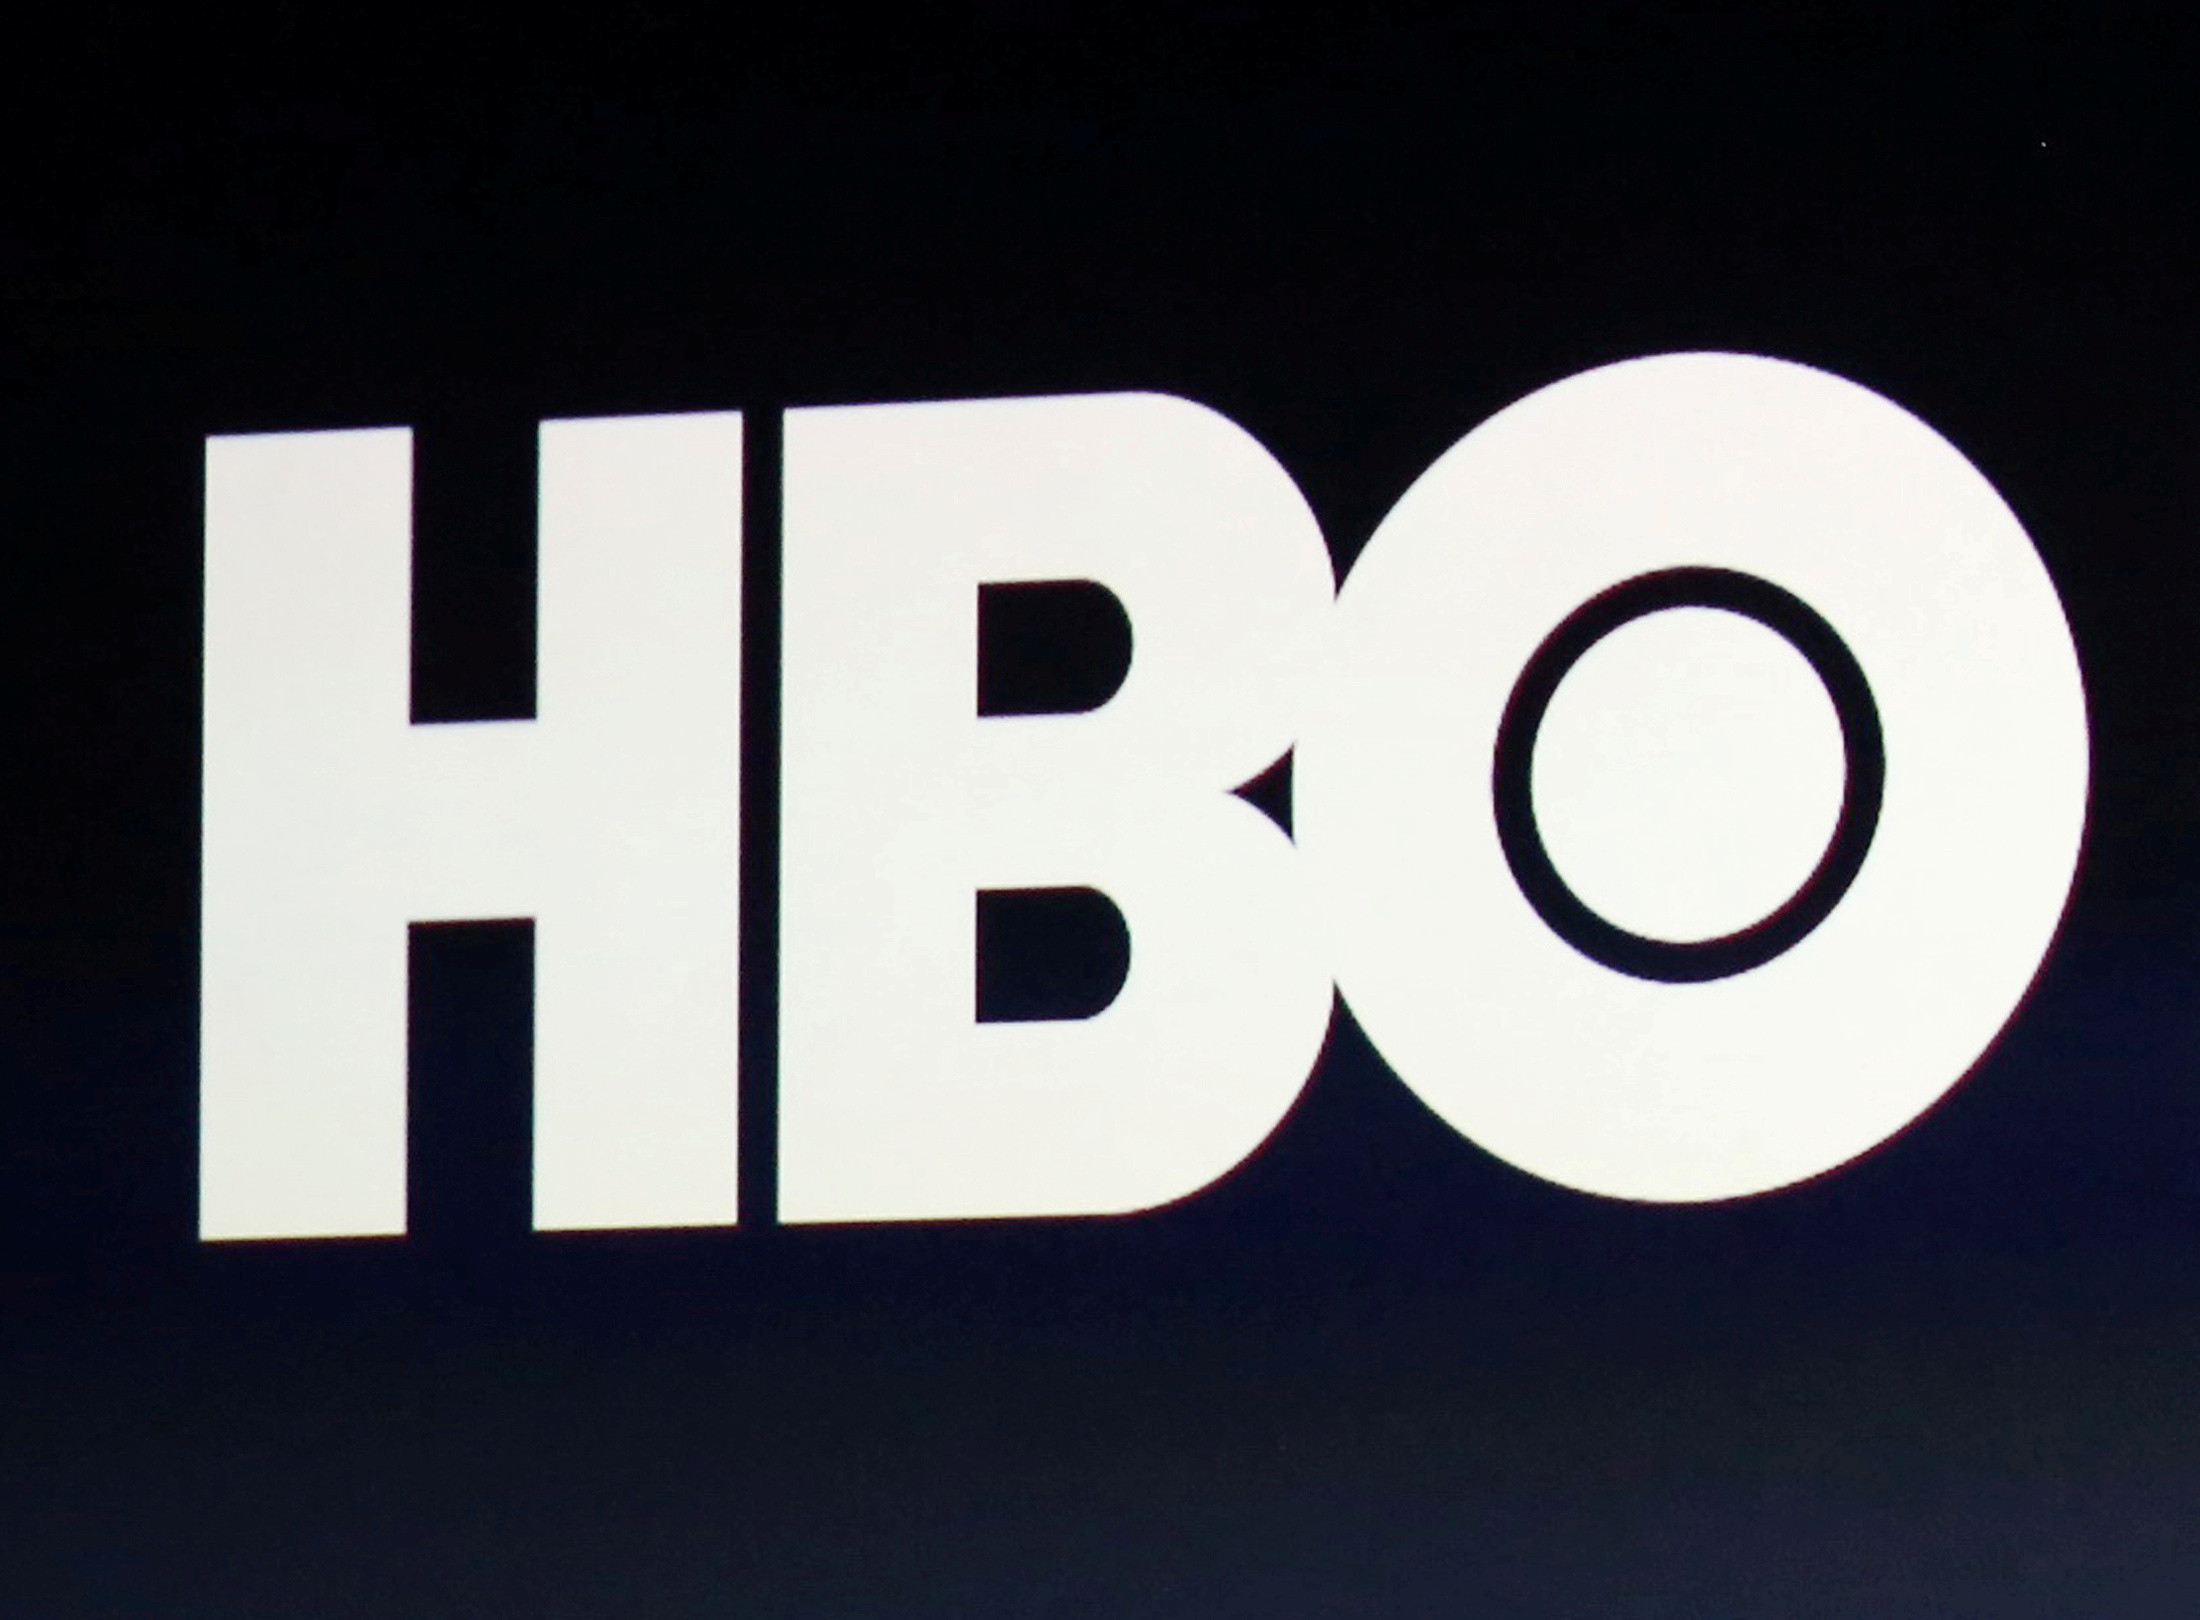 Photo of HBO subscribers increase by 13 million as Netflix growth slows